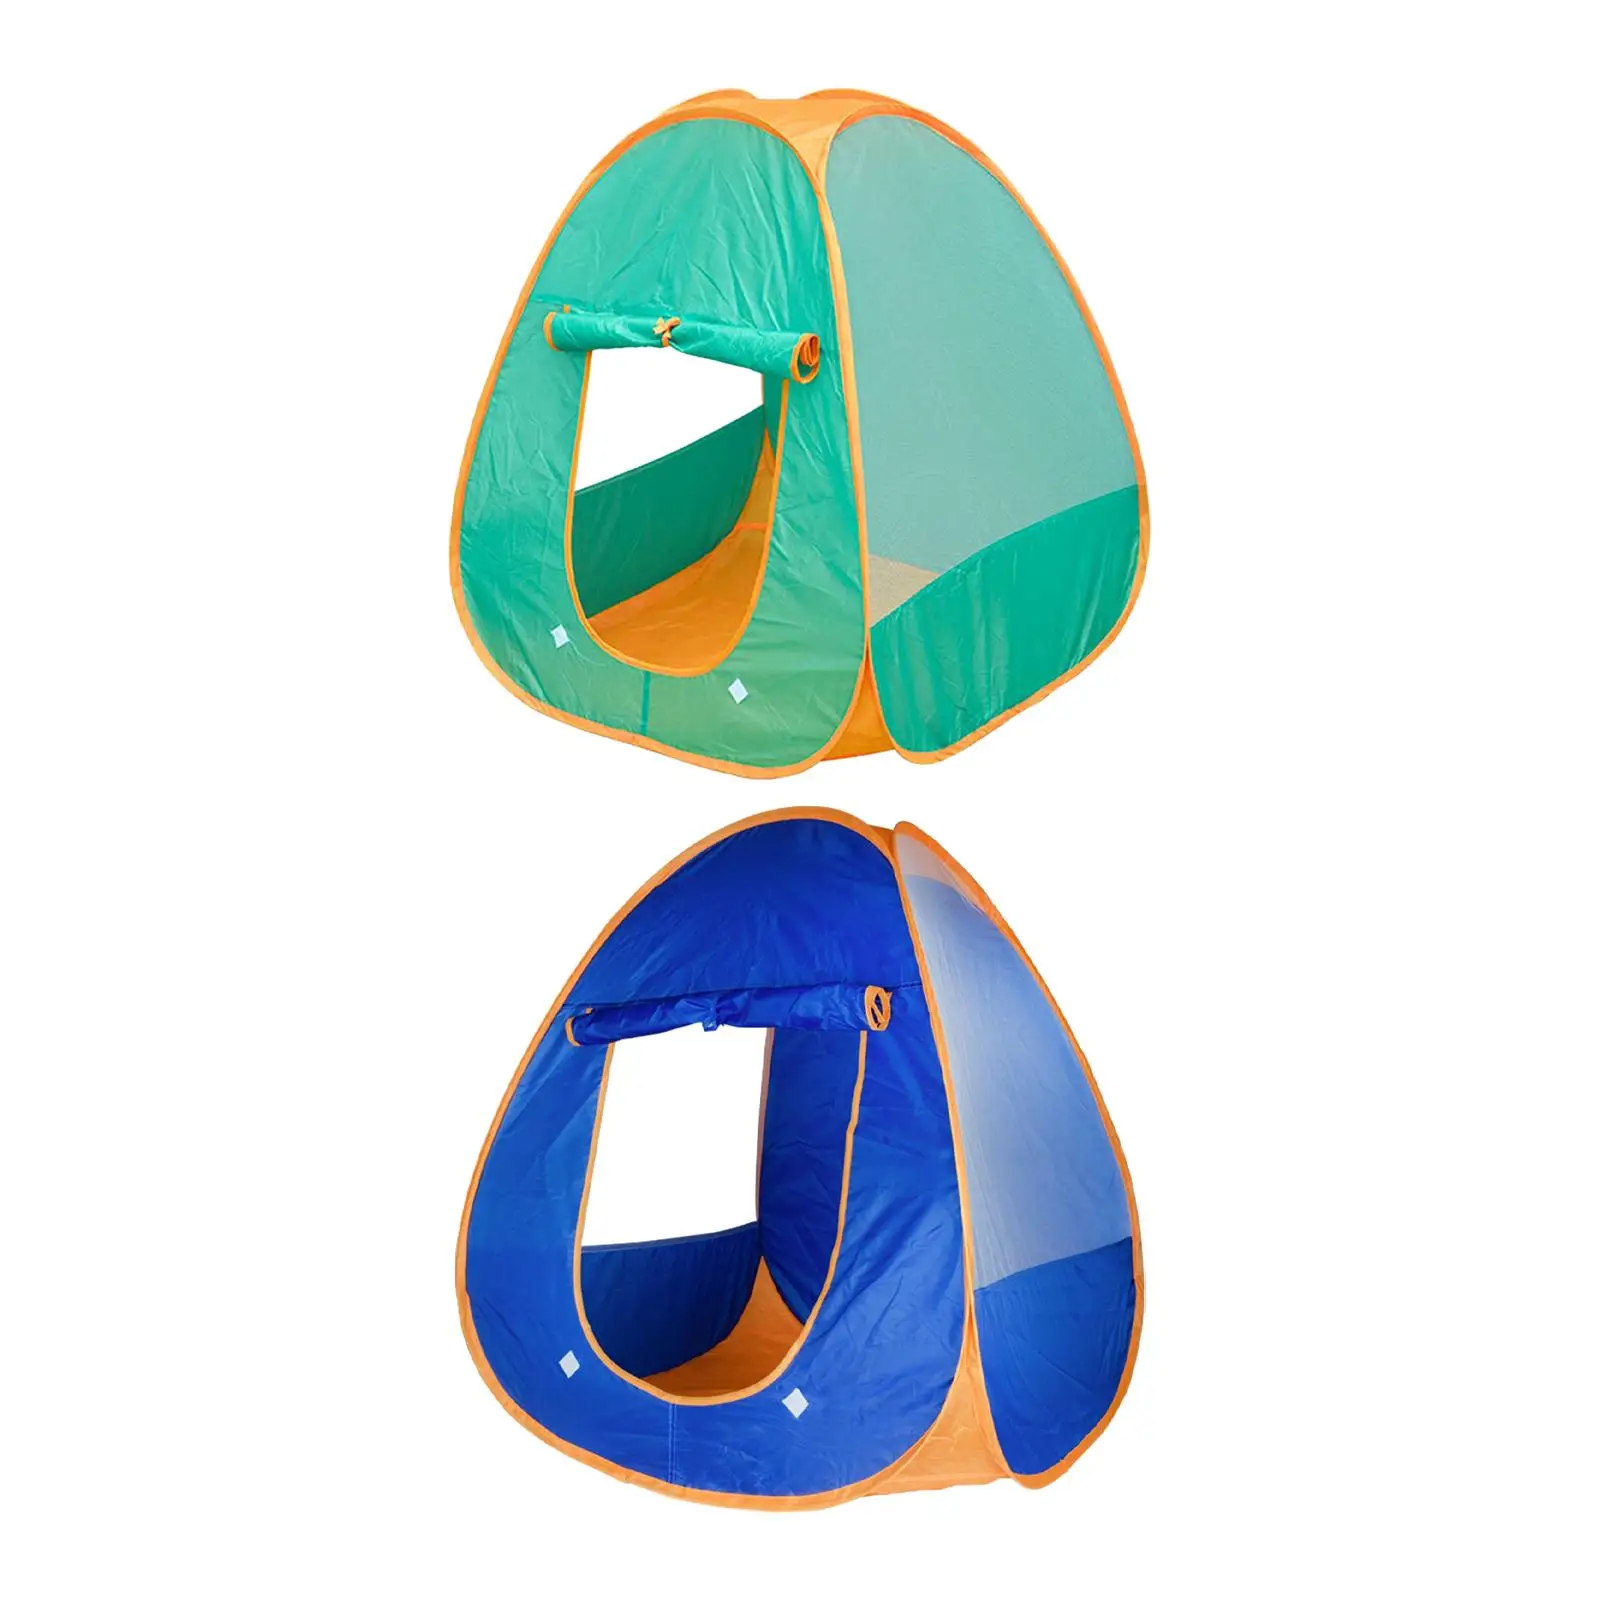 Kids Play Tent Foldable Pretend Play Playhouse Toys Birthday Gifts Child Room Decor for Game Indoor Outdoor Camping Beach